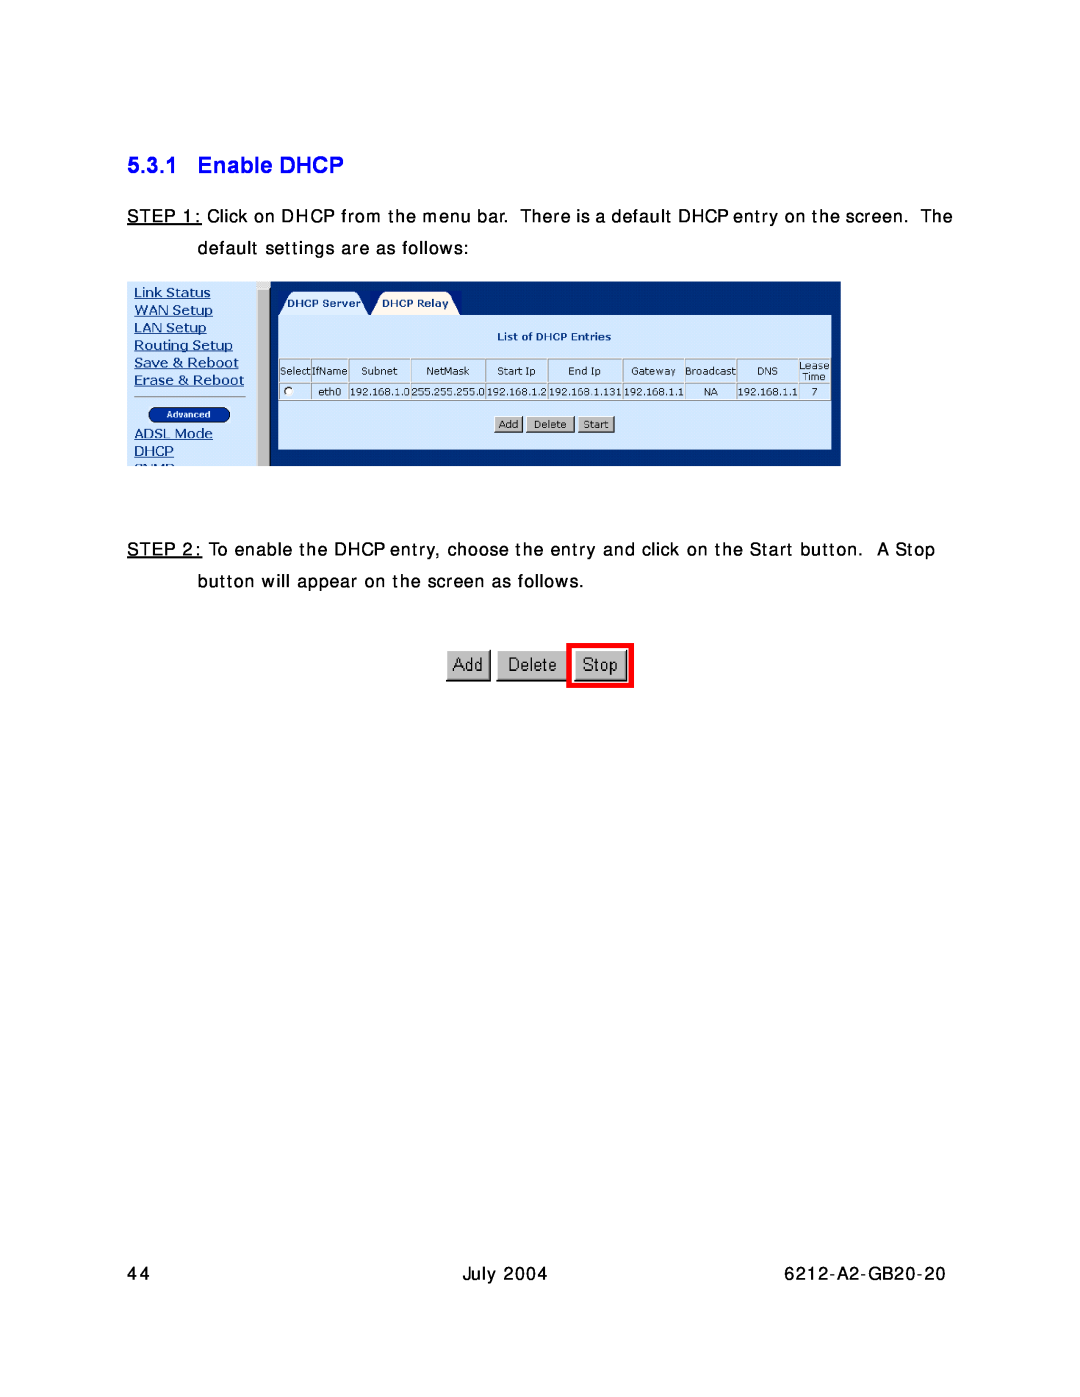 Paradyne manual Enable DHCP, July, 6212-A2-GB20-20 